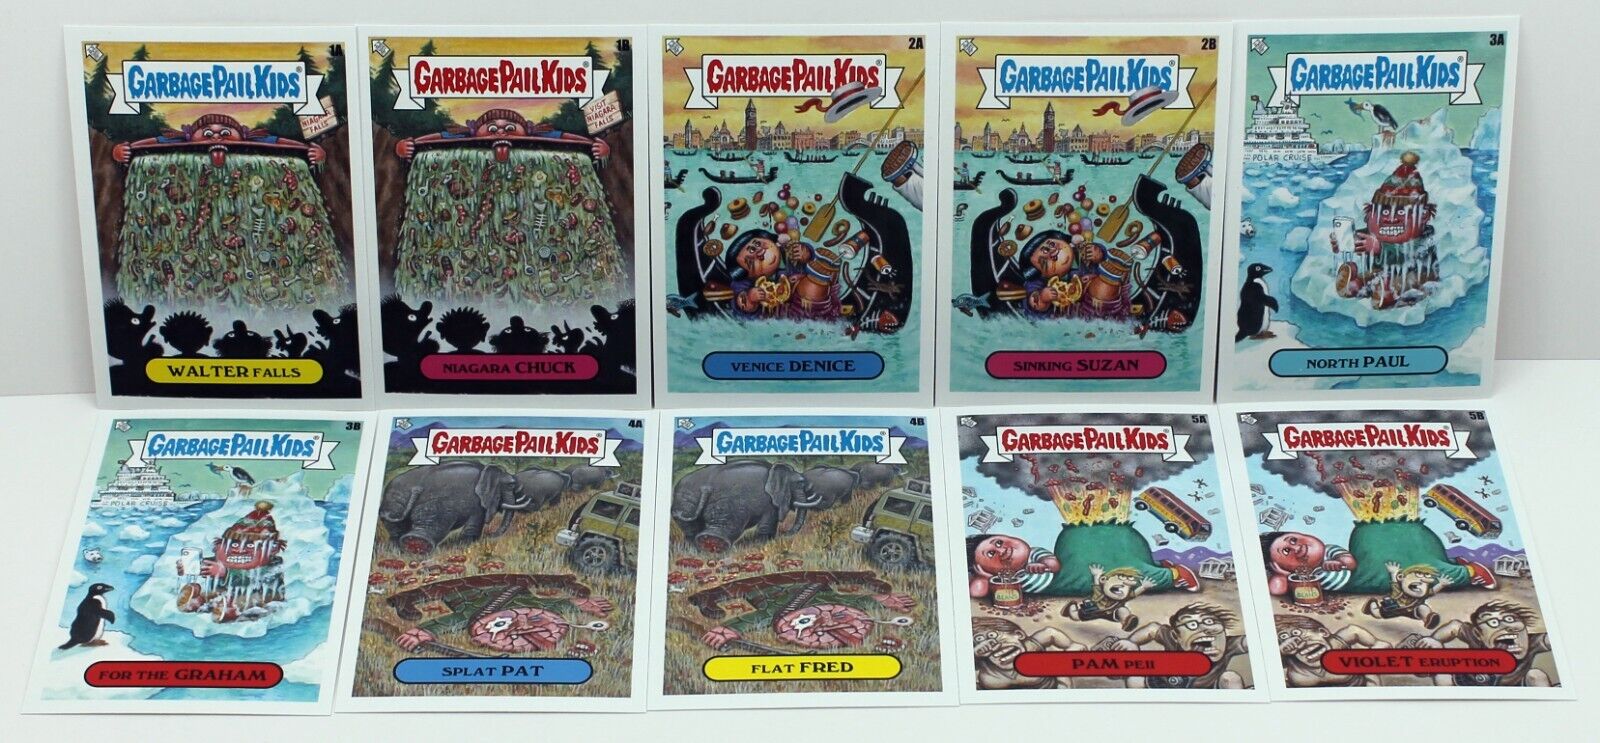 2023 Garbage Pail Kids - GPK Goes On Vacation Famous Landmarks by Tom Bunk Card